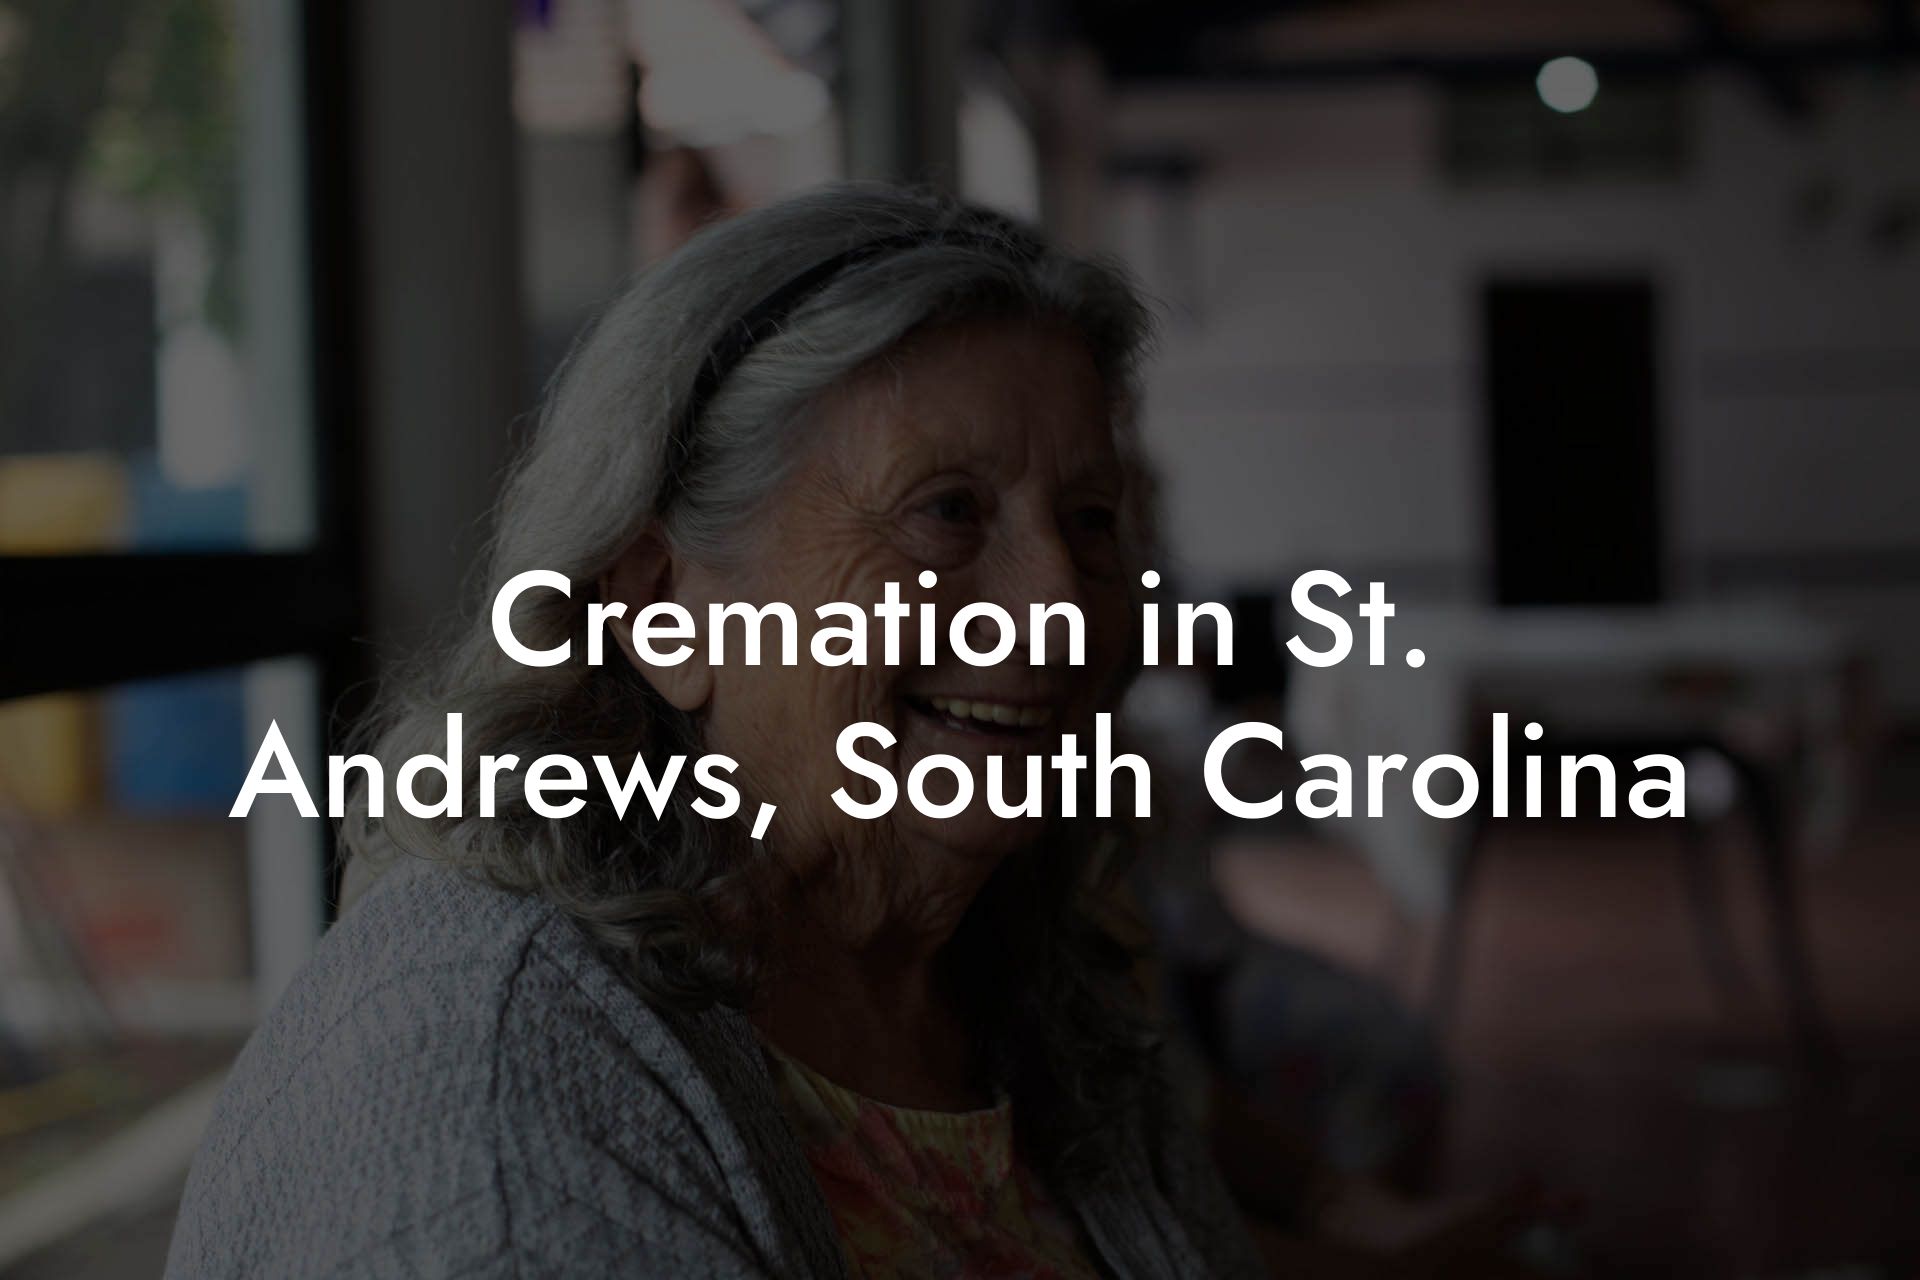 Cremation in St. Andrews, South Carolina